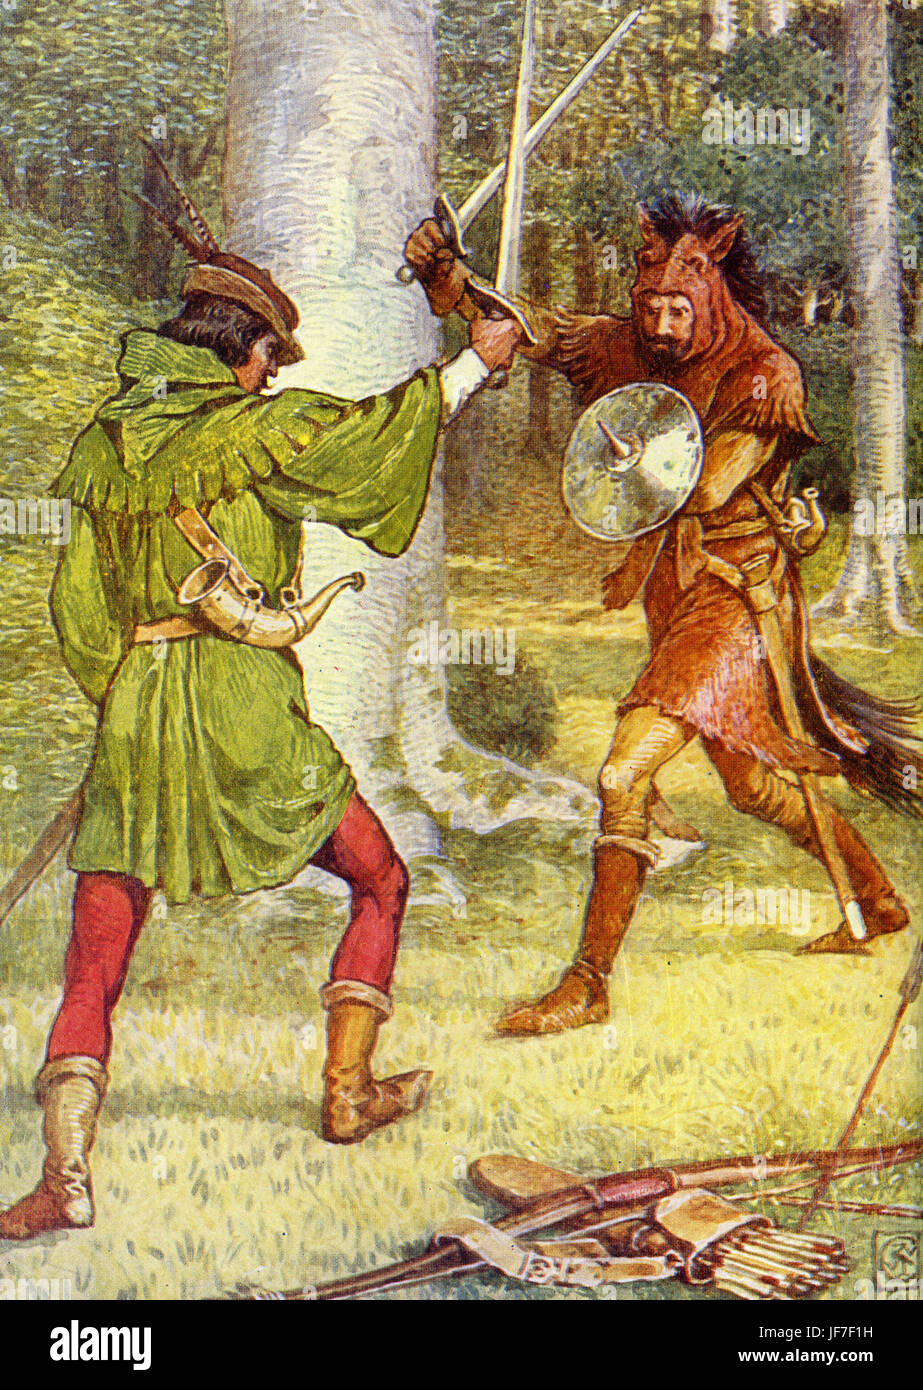 Robin Hood and the men of the Greenwood by Henry Gilbert. Caption reads: 'The clang of sword upon sword'. (Robin Hood in fight). Illustrated by Walter Crane. C.1912 Stock Photo